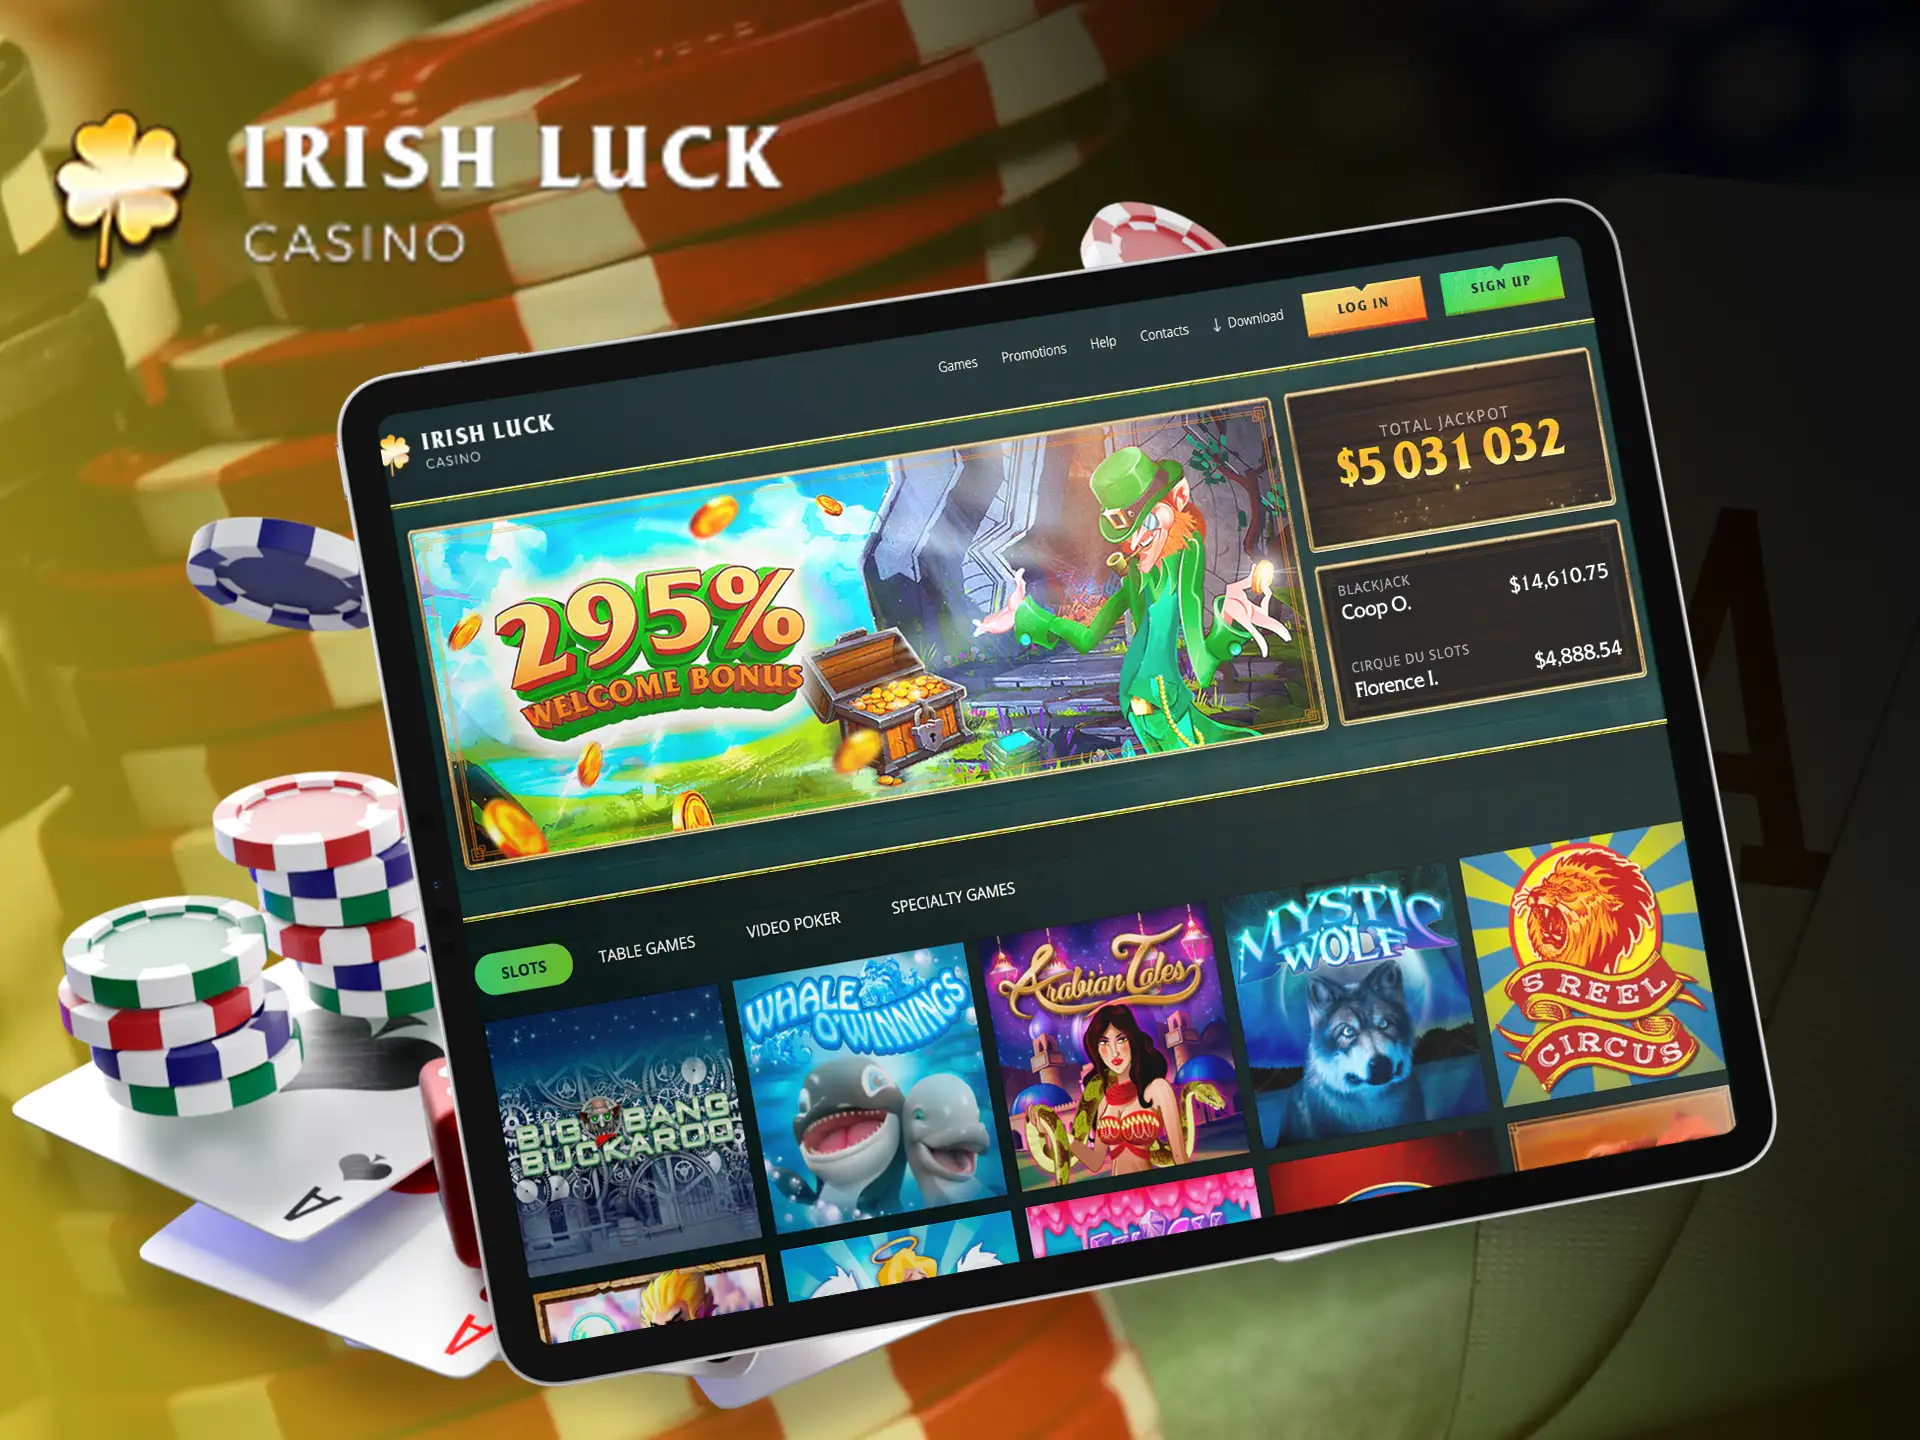 Roulette is the headliner in this category, you will also find blackjack, poker, baccarat and other types of gambling games in Irish Luck.